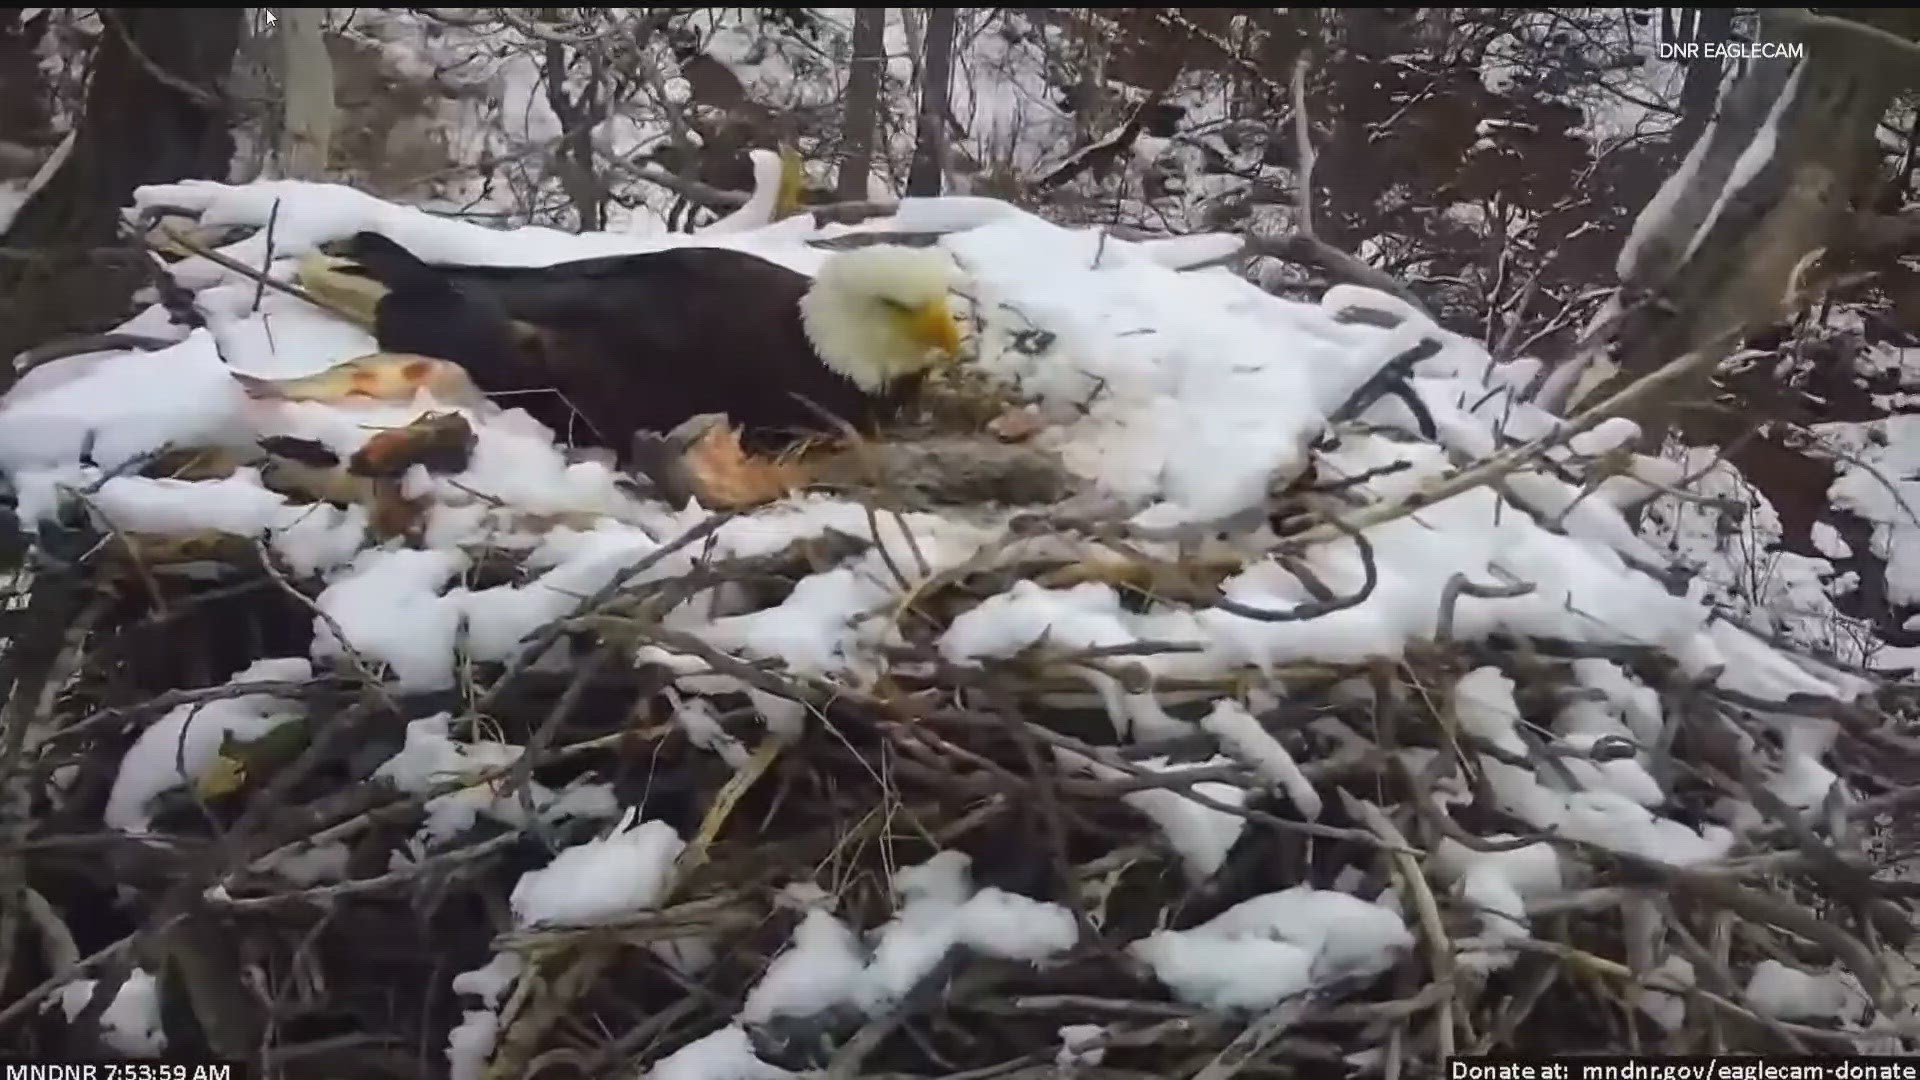 The Minnesota DNR announced the end of chick season since the chances of the female eagle laying another egg are very slim.